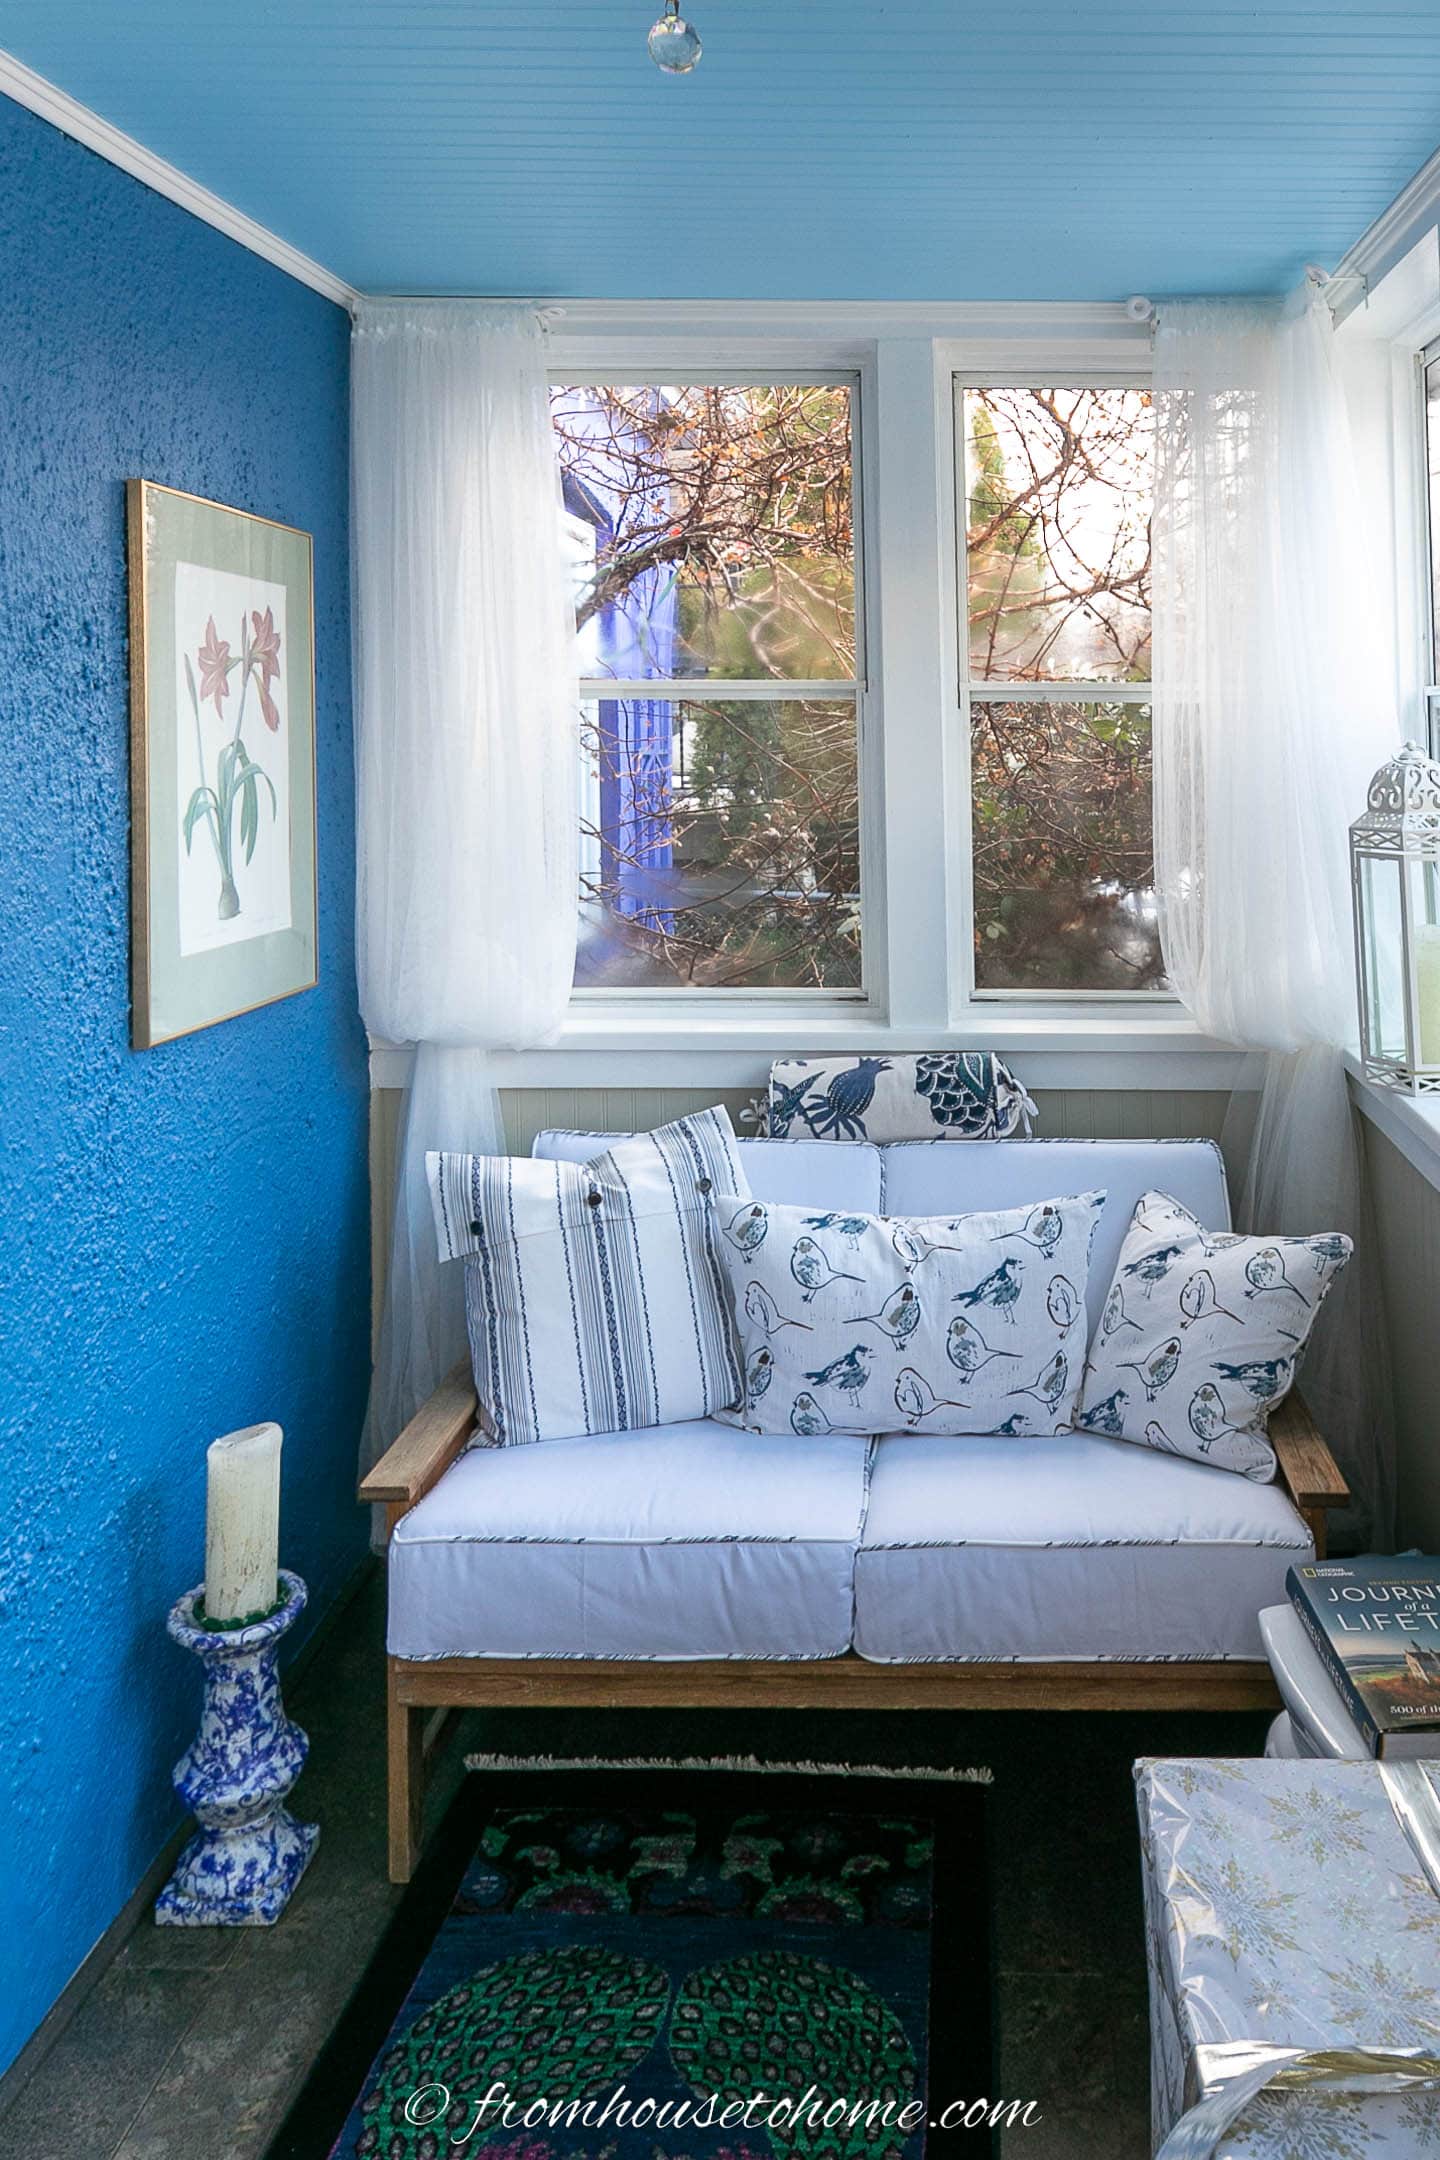 Porch with darker blue walls and a light blue ceiling